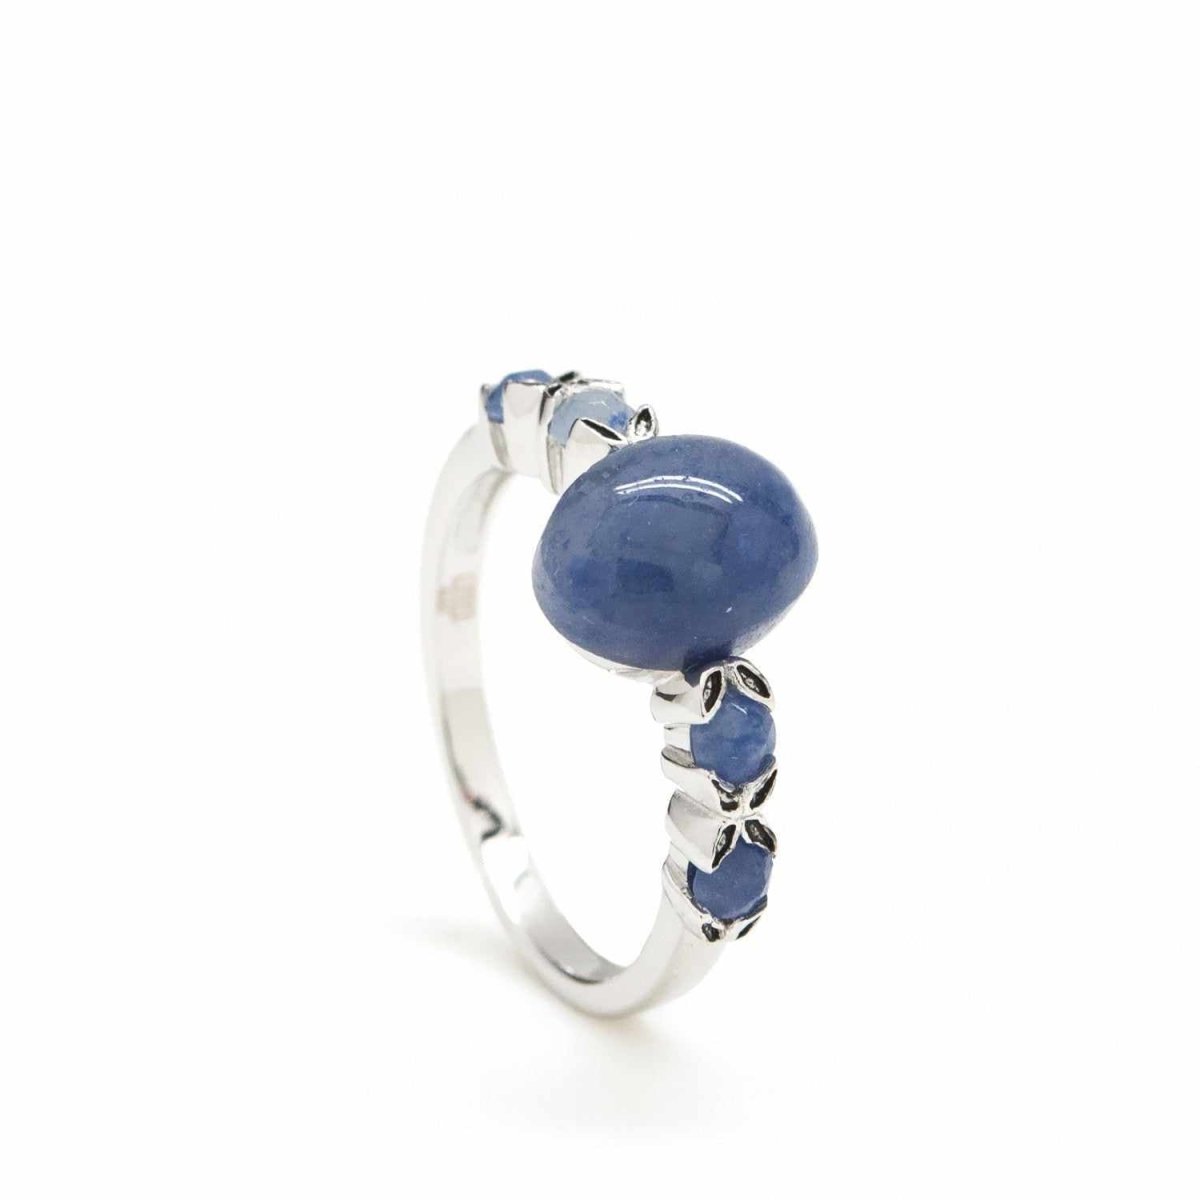 Ring - Rings with spheres design stones in azurite tone